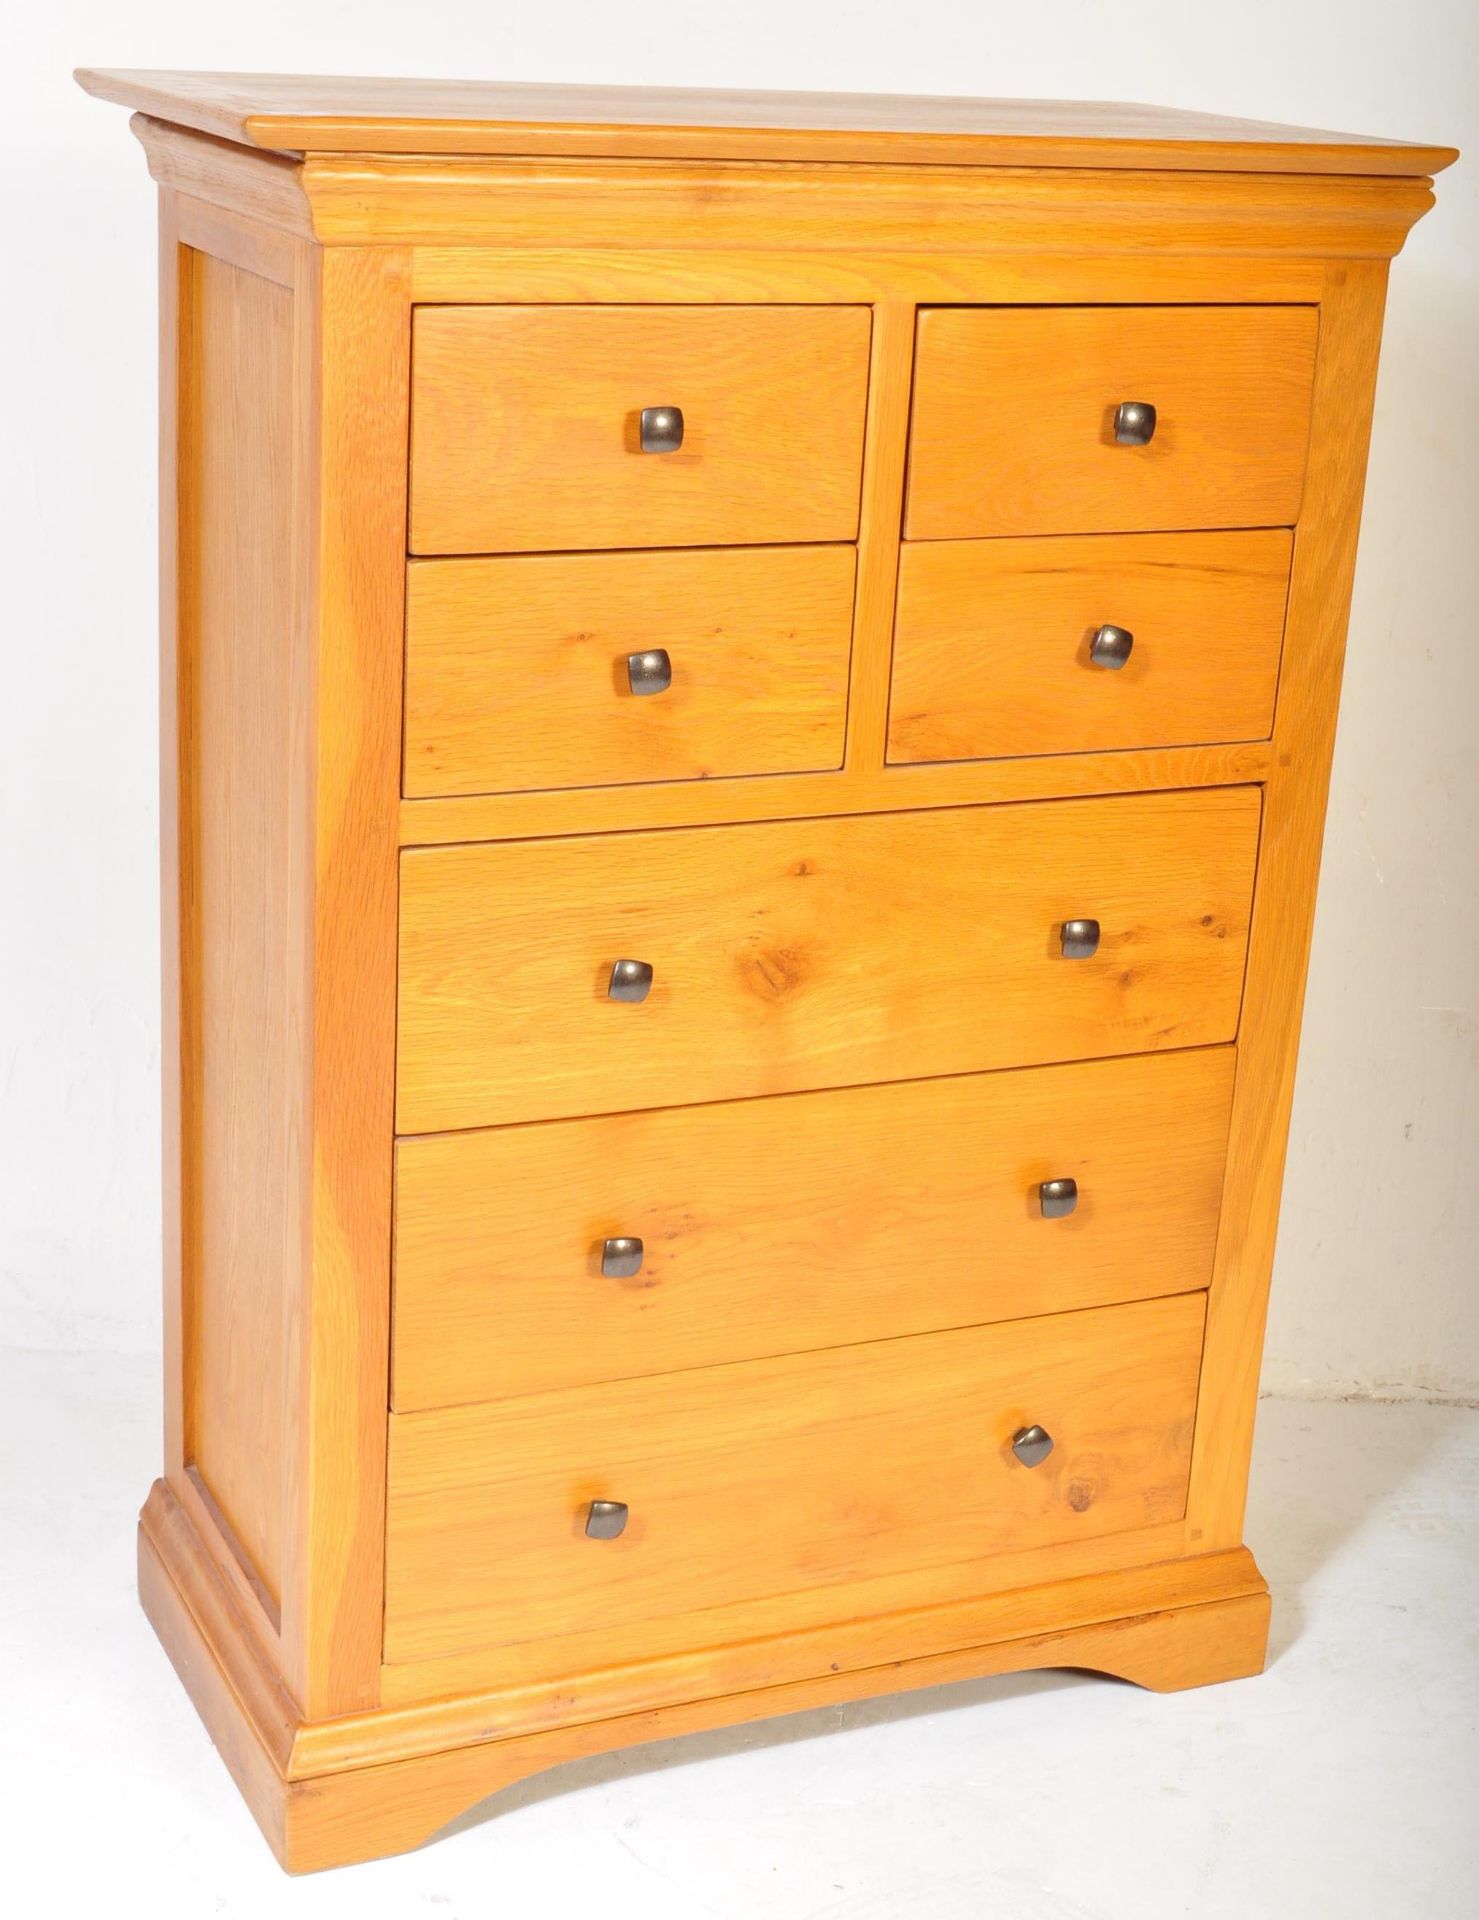 CONTEMPORARY OAK FURNITURE LAND CHEST OF DRAWERS - Image 2 of 5